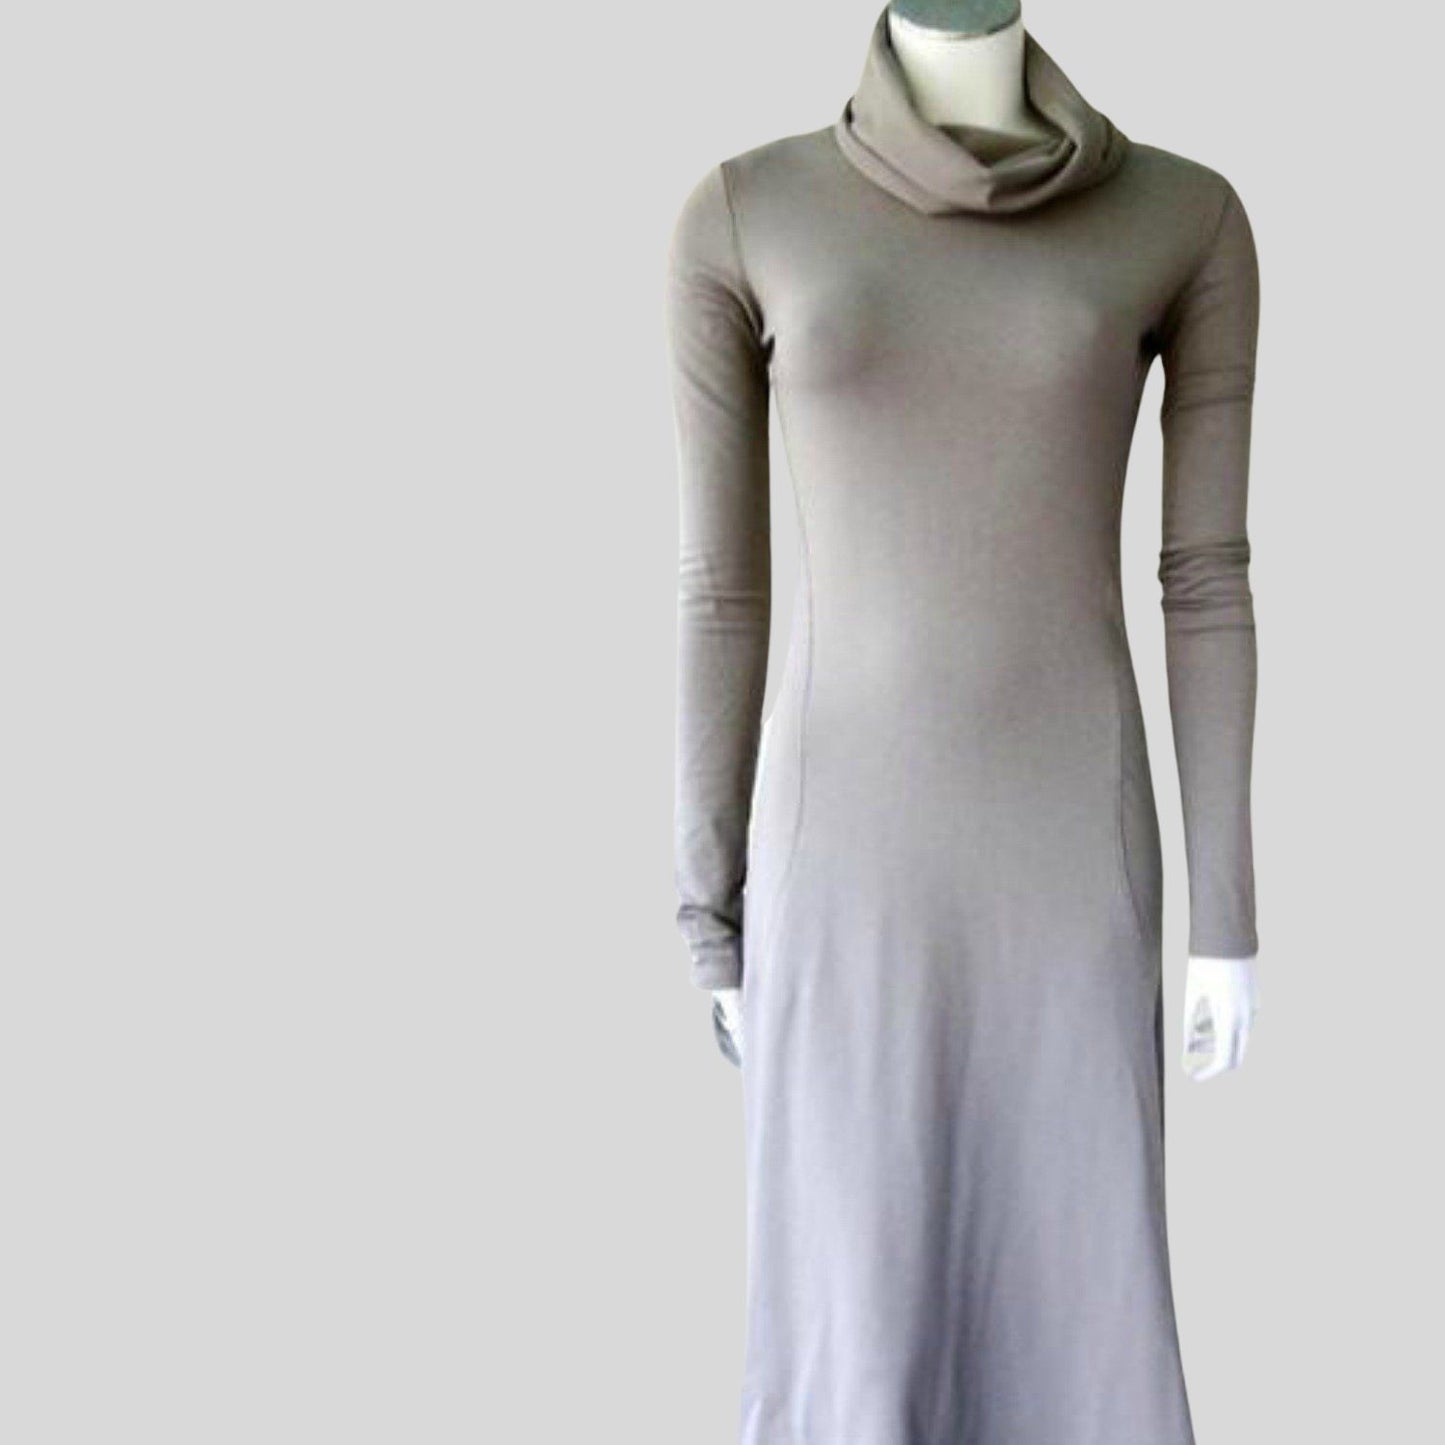 Made in Canada long grey dress | Shop organic cotton dresses | Econica 